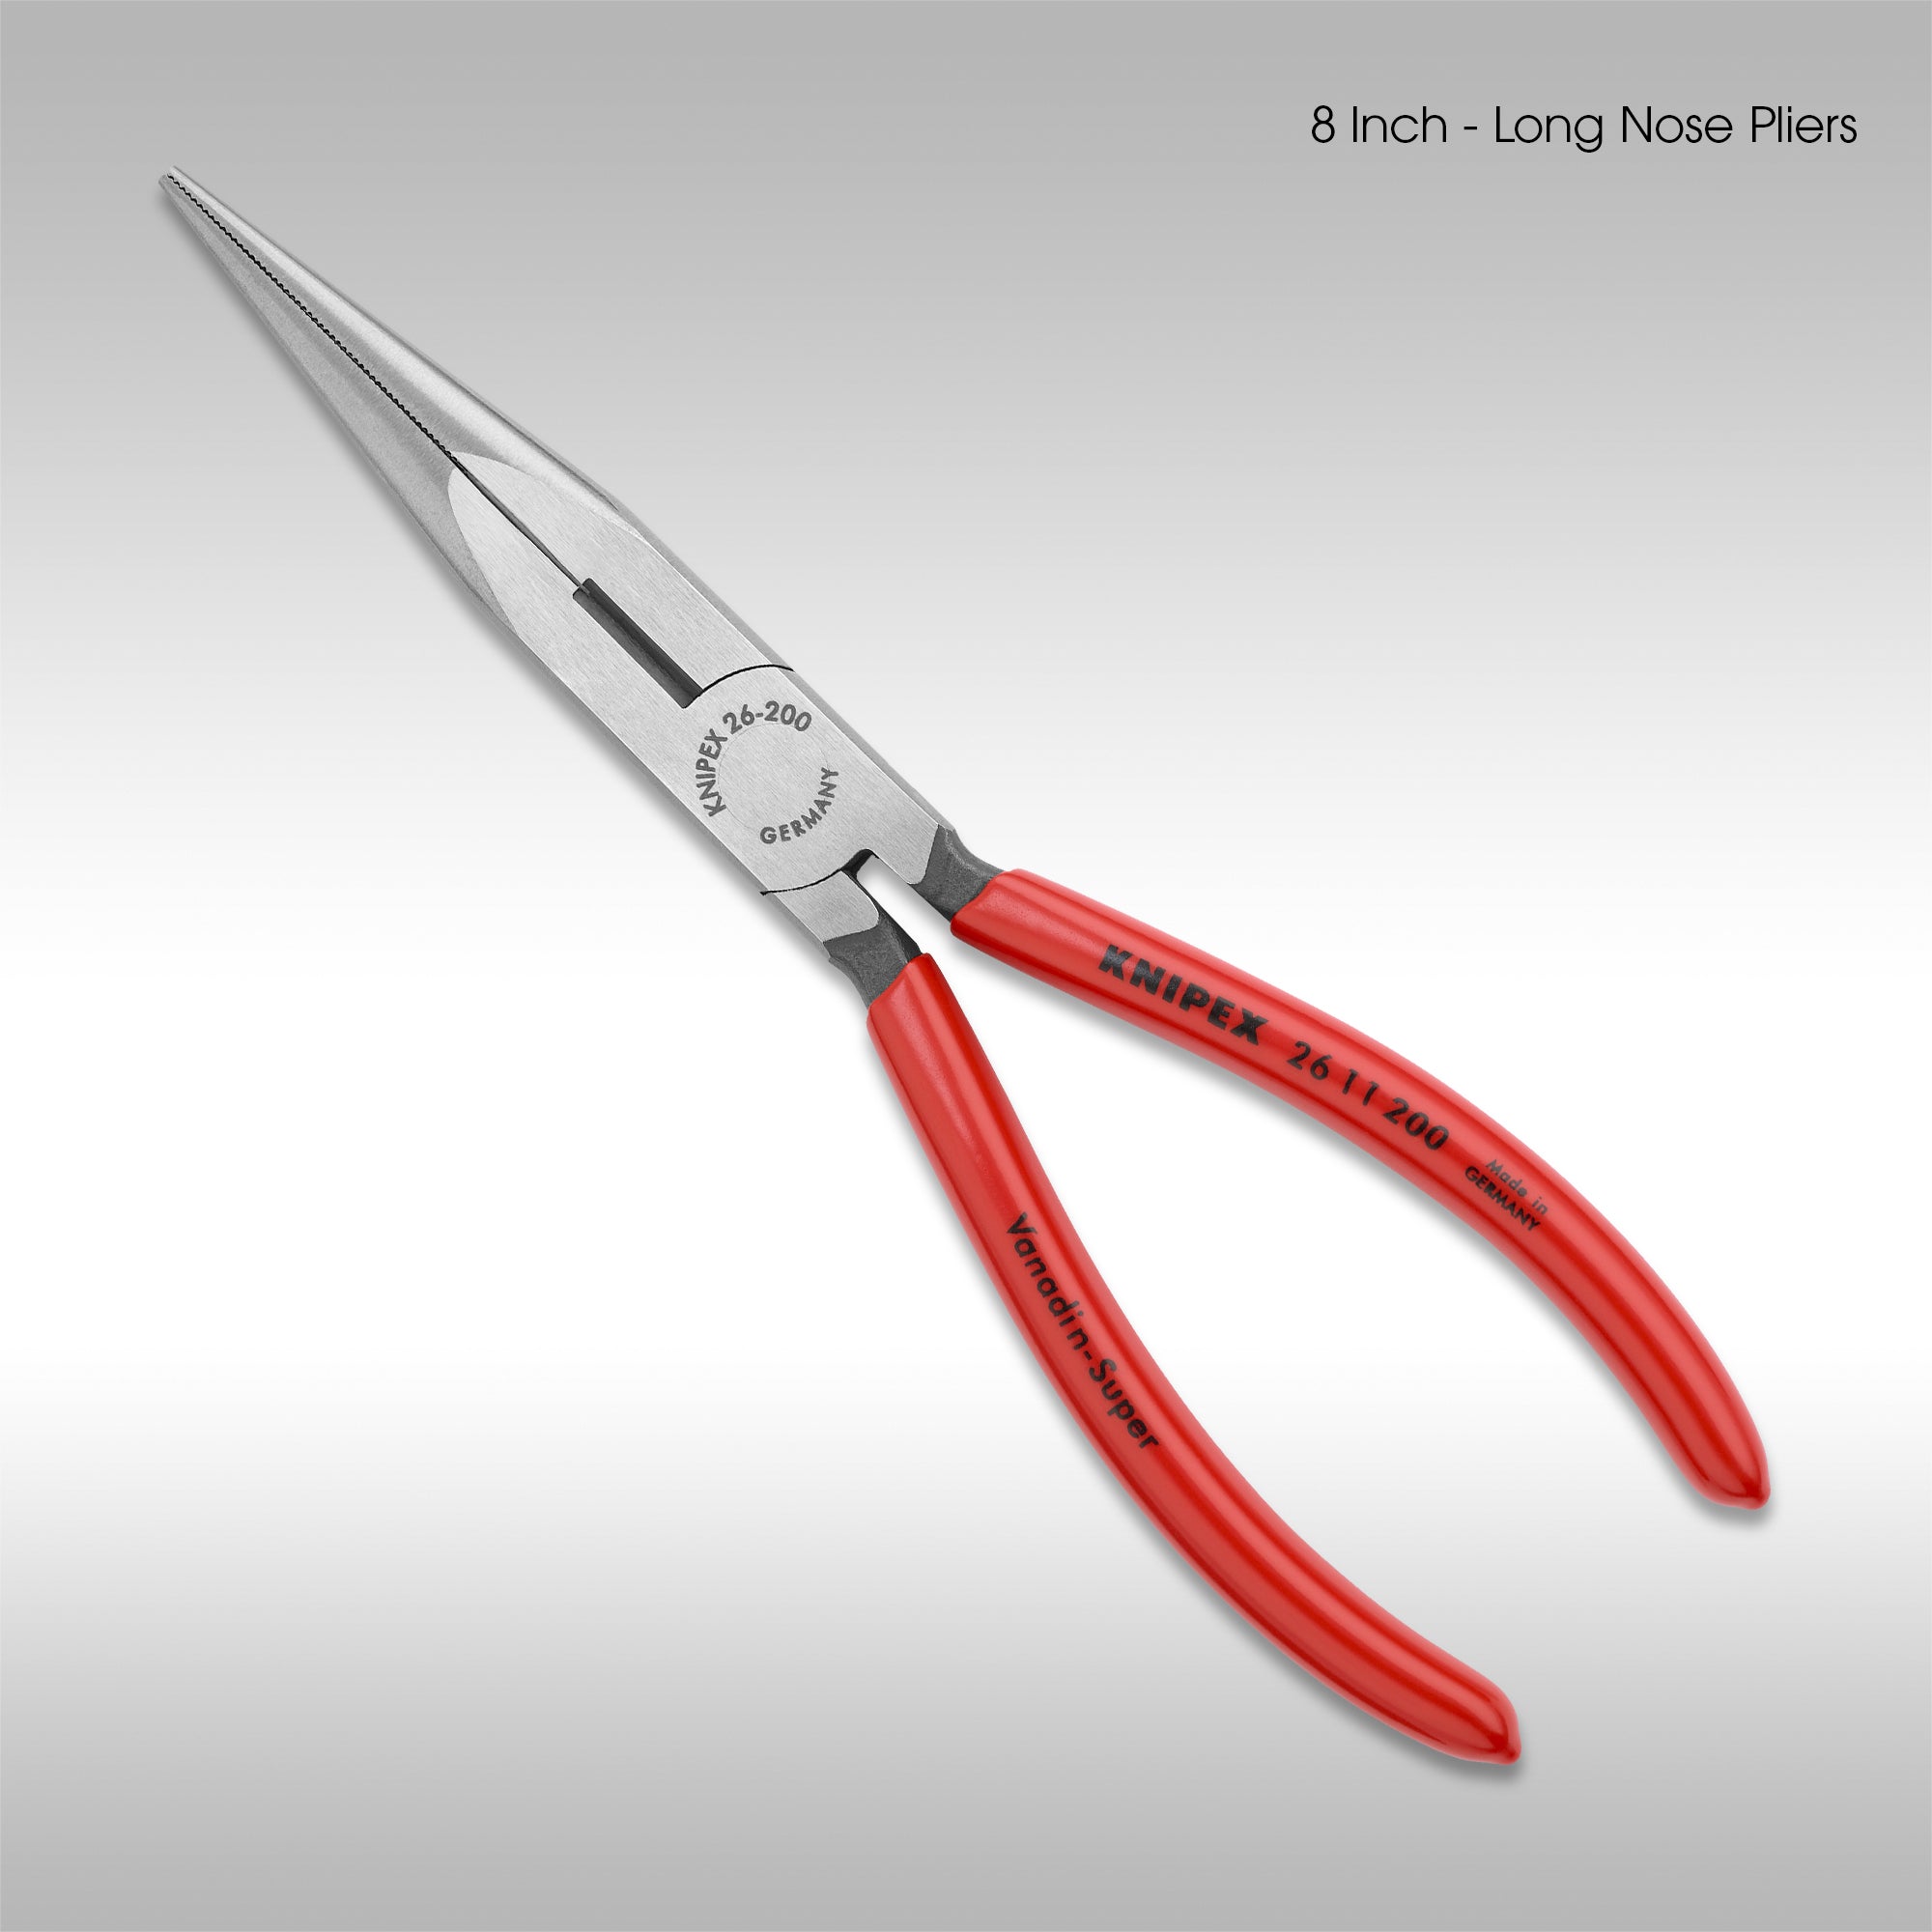 KNIPEX - PLIERS, THE BASICS - Online Inc.